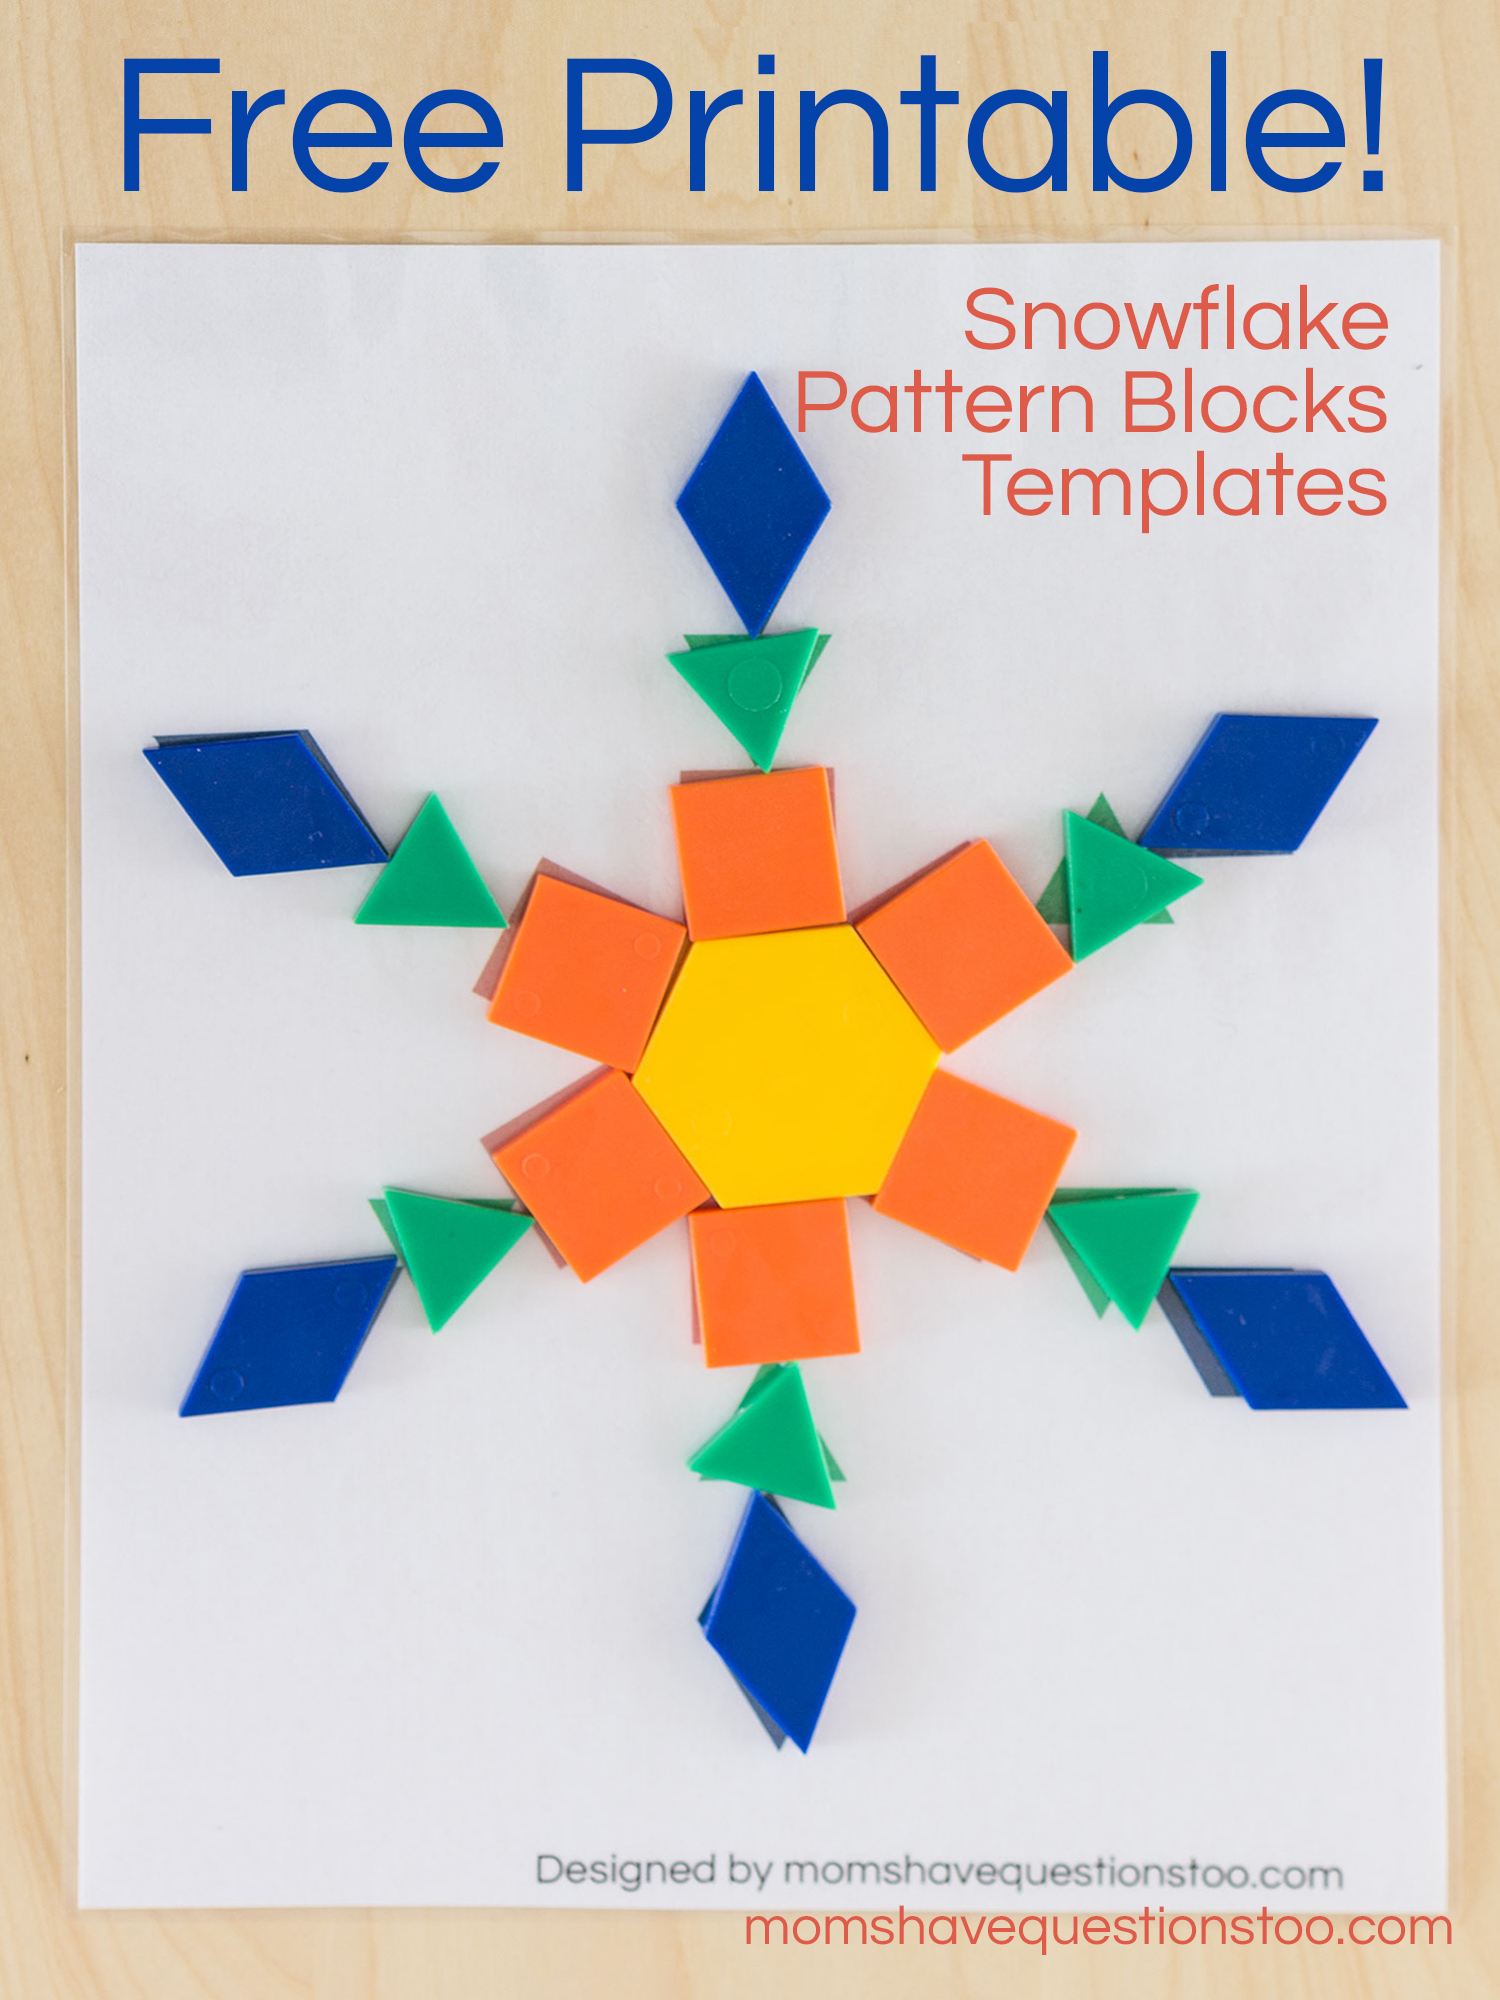 snowflake-pattern-blocks-templates-moms-have-questions-too